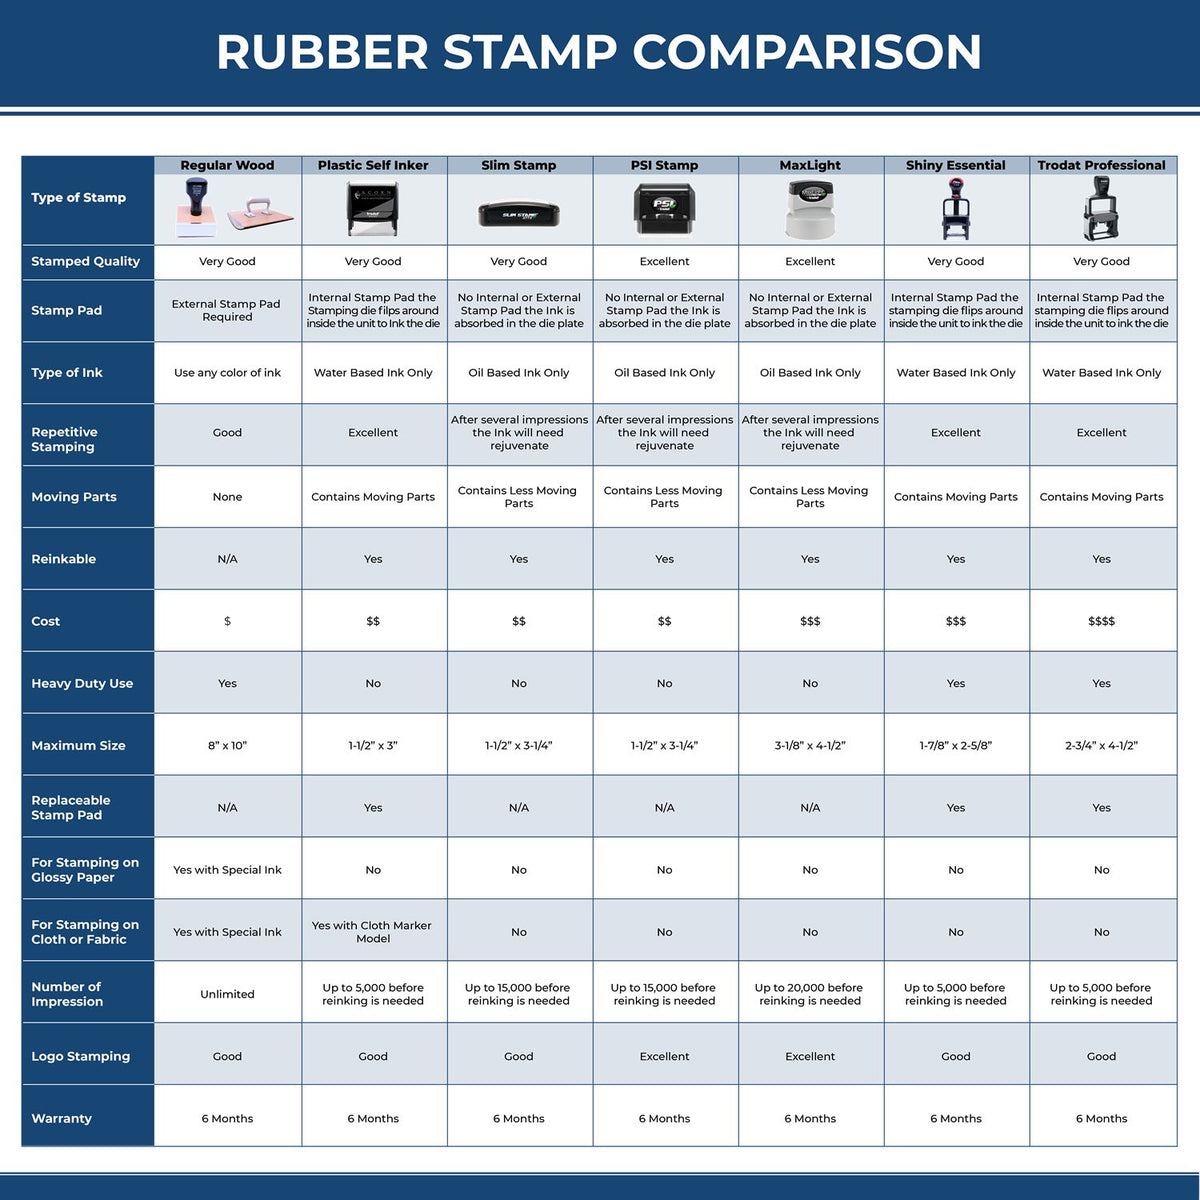 A comparison chart for the different types of mount models available for the Premium MaxLight Pre-Inked Michigan Engineering Stamp.